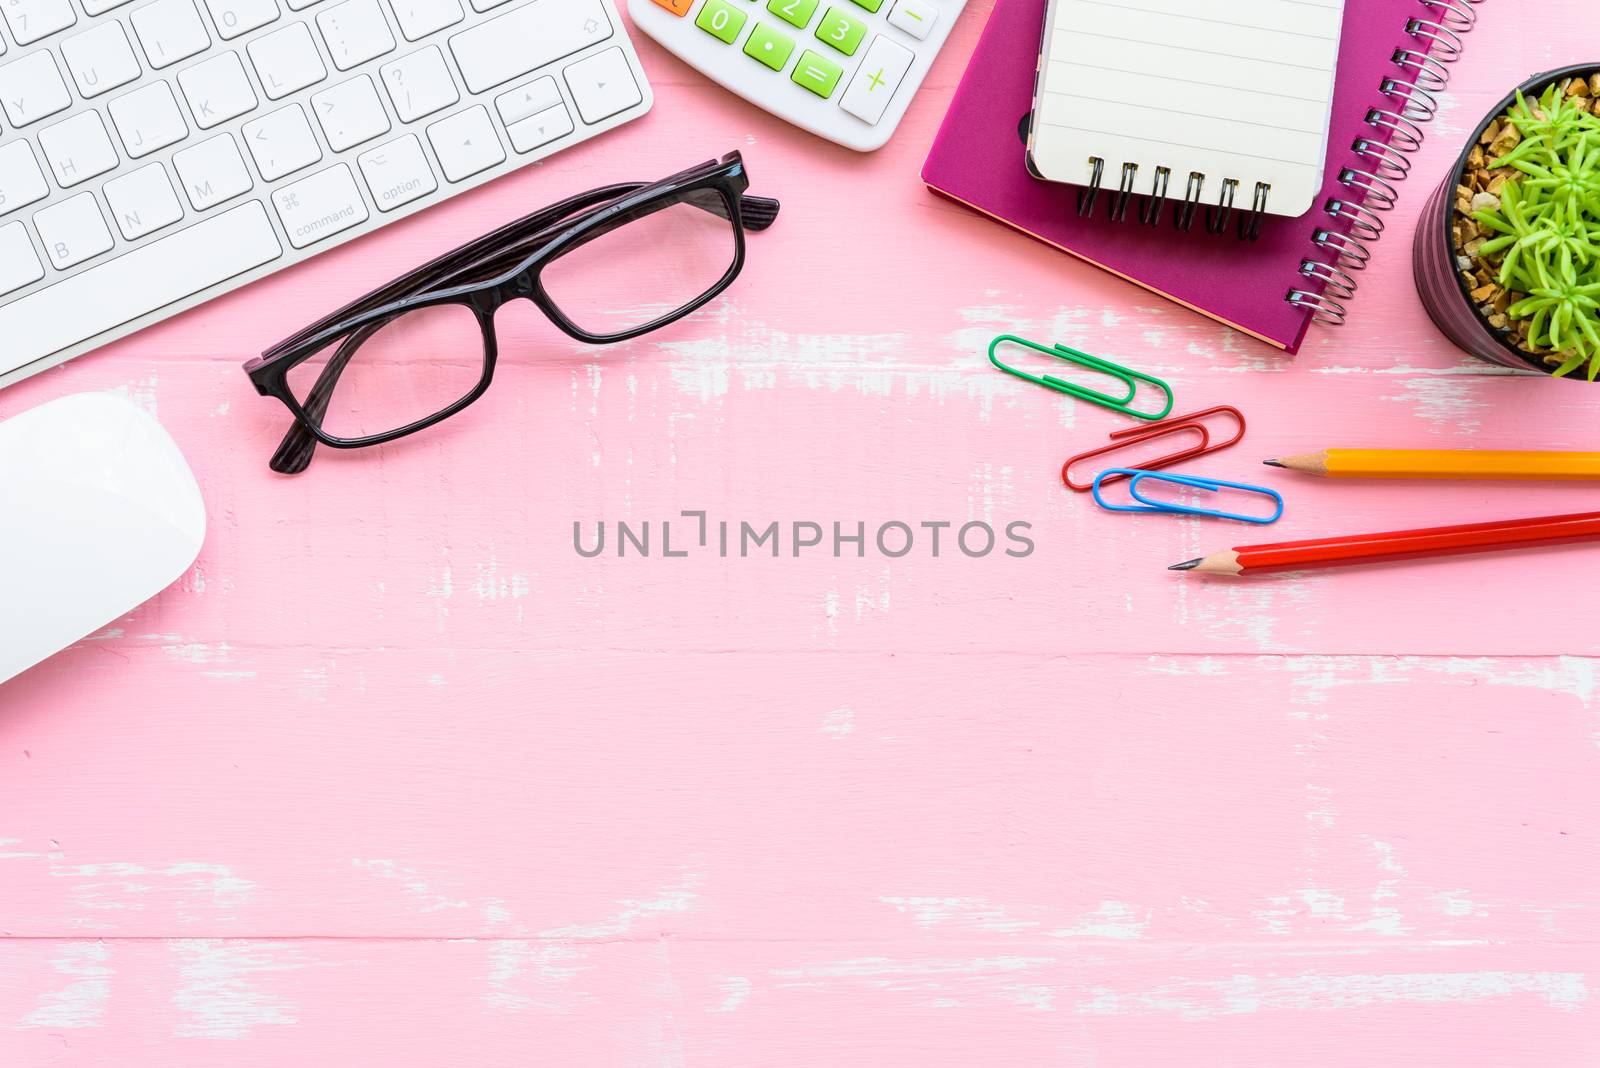 Top view office table with workspace and office accessories including calculator, mouse, keyboard, glasses, clips, flower, pen, pencil, Pencil sharpener , note book, laptop and coffee on bright pink and white wooden background.